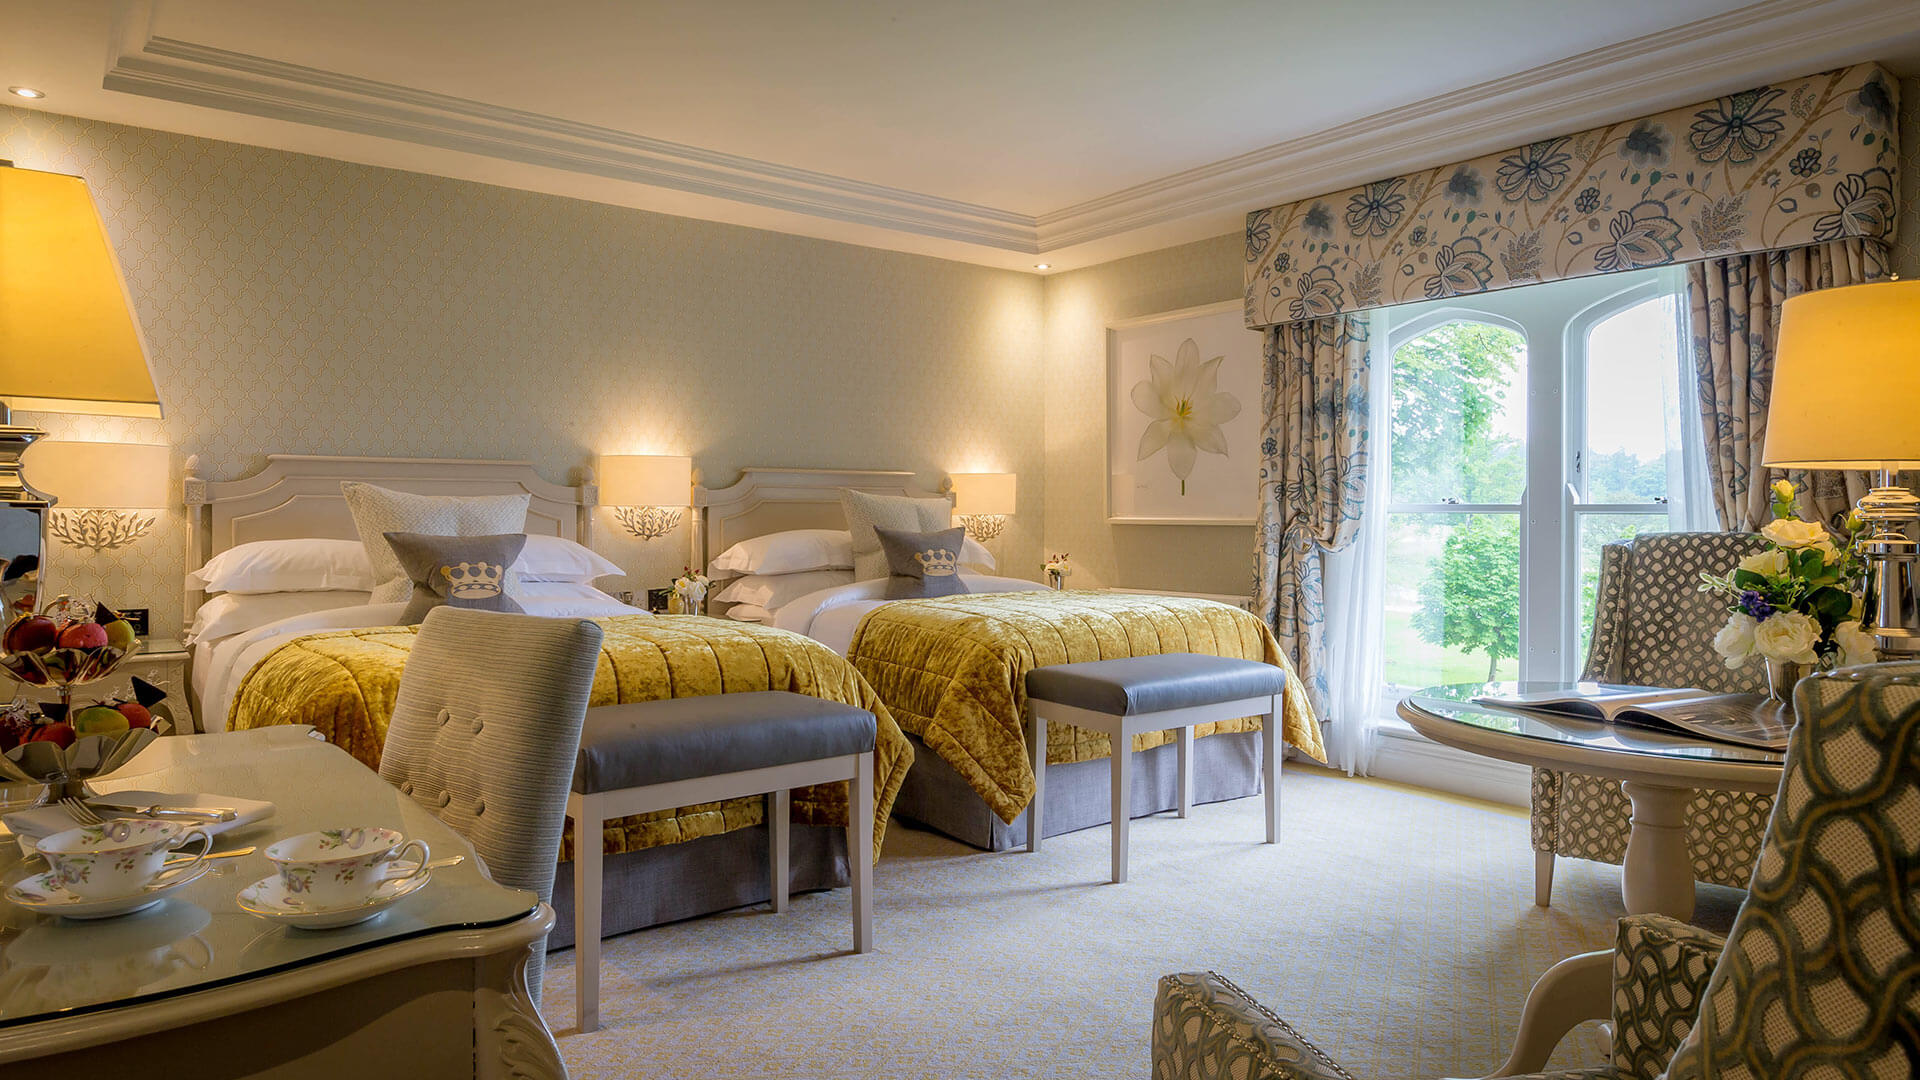 Deluxe Rooms | 5 Star Luxury Accommodation - Dromoland Castle